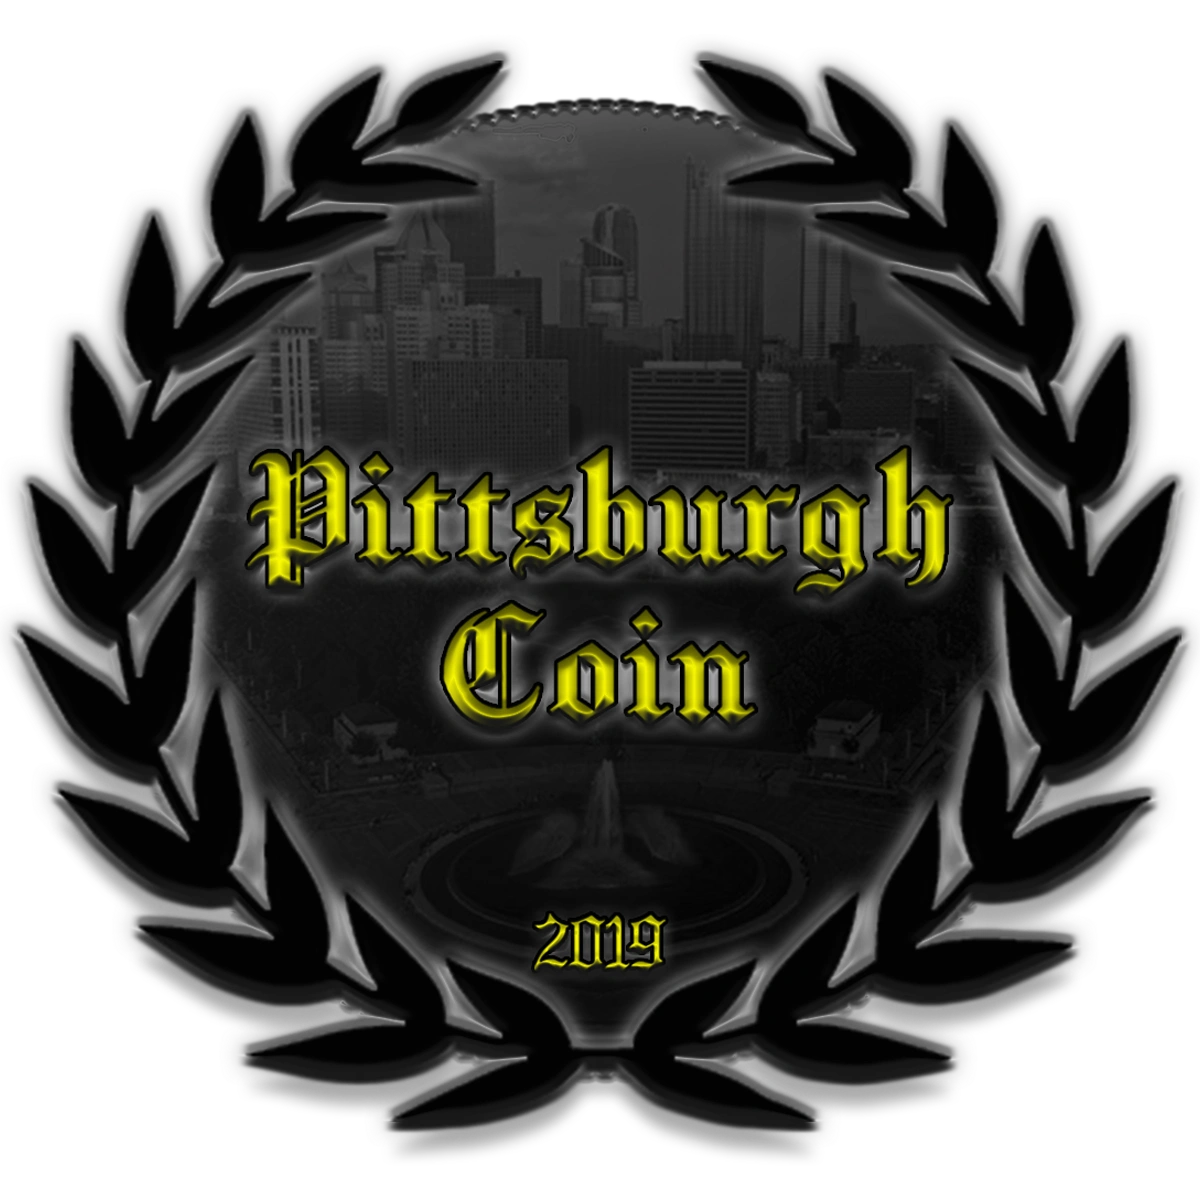 Home Pittsburgh Coin